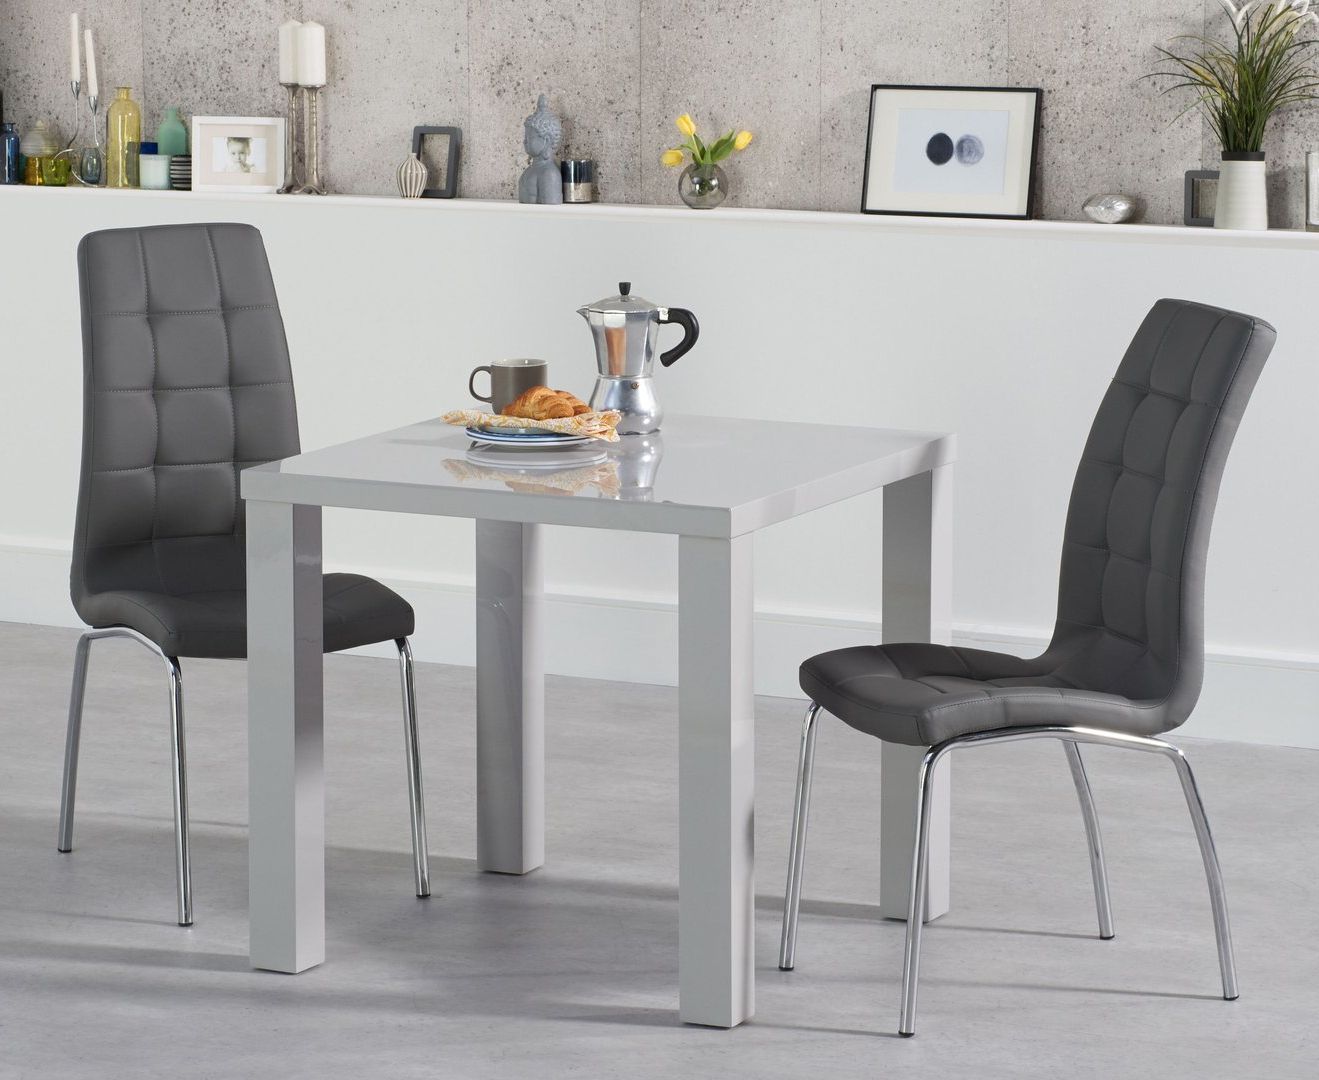 Best And Newest Square Light Grey High Gloss Dining Table & 2 Chairs With Glossy Gray Dining Tables (View 15 of 15)